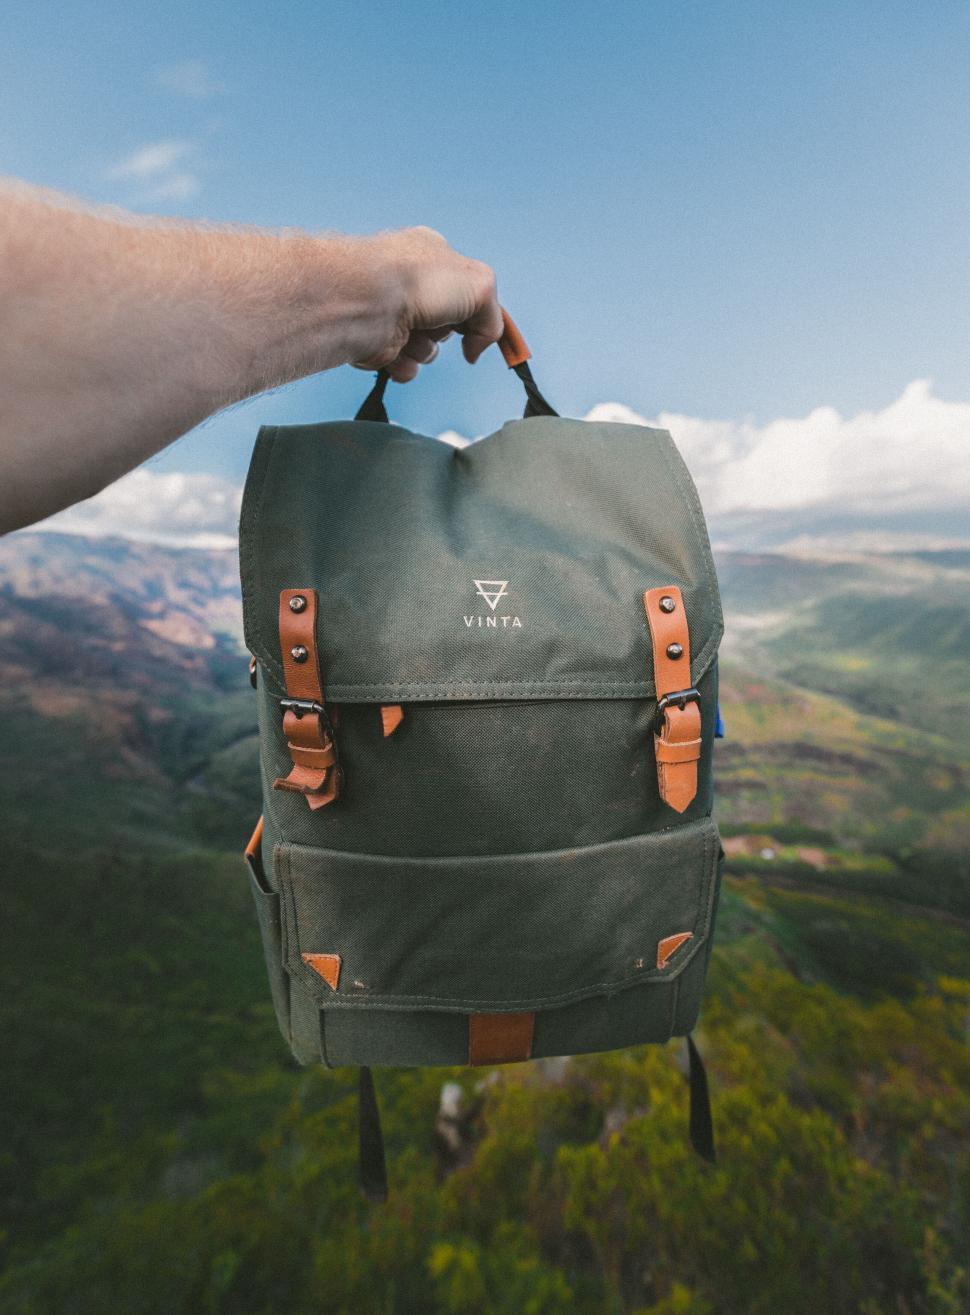 Free Image of Backpack held up against scenic nature 